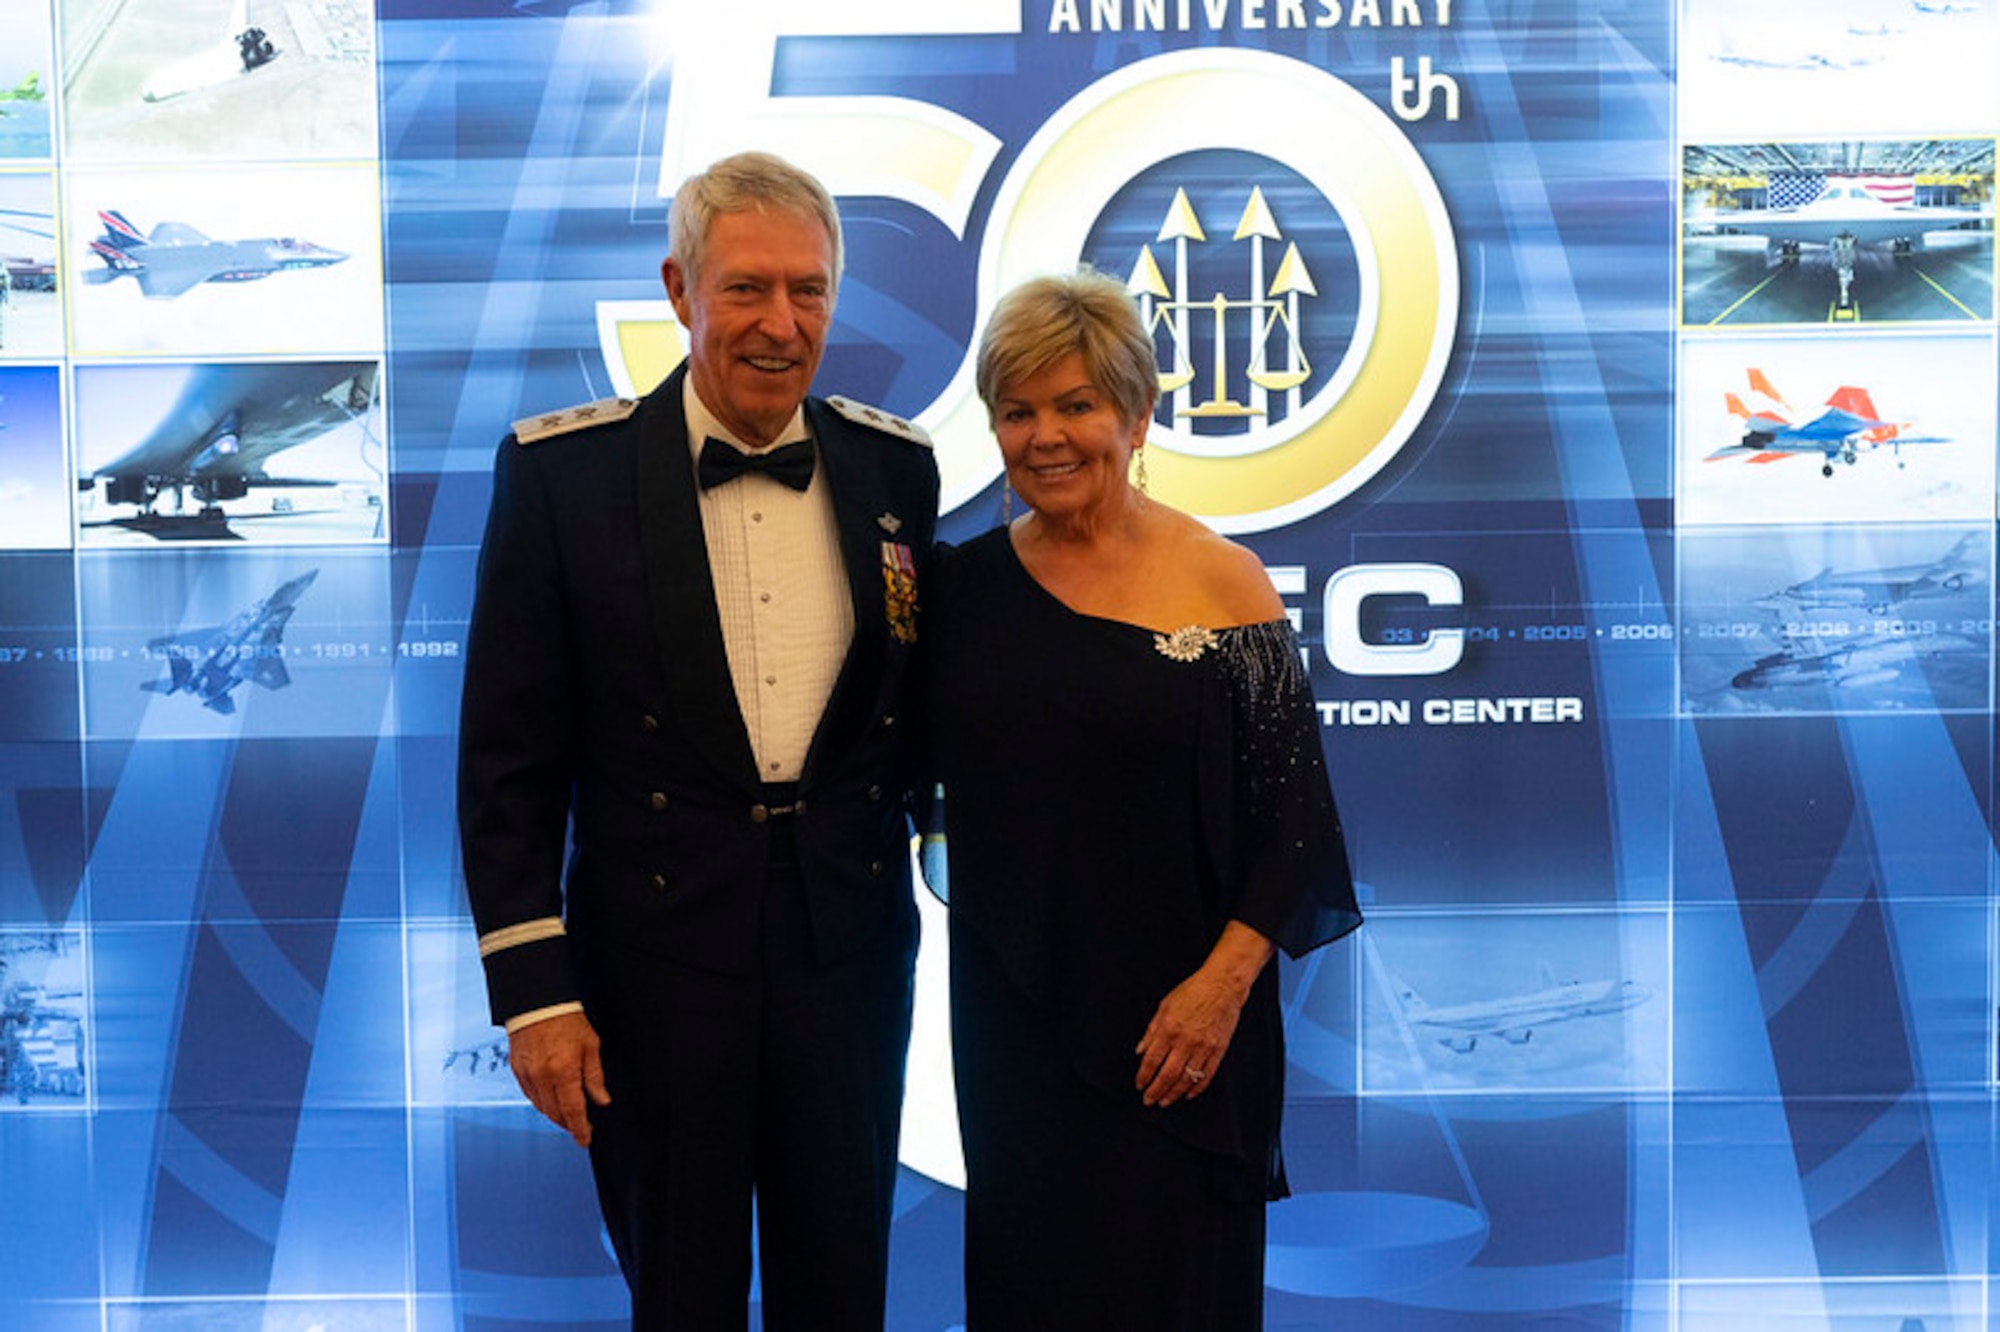 Retired Maj. Gen. William A. Peck, Jr., and his wife Judy attend the Air Force Operational Test and Evaluation Center 50th Anniversary Celebration held at the Sandia Resort in Albuquerque, N.M., on March 6, 2024. General Peck was the AFOTEC Commander from March 2000 to February 2003.